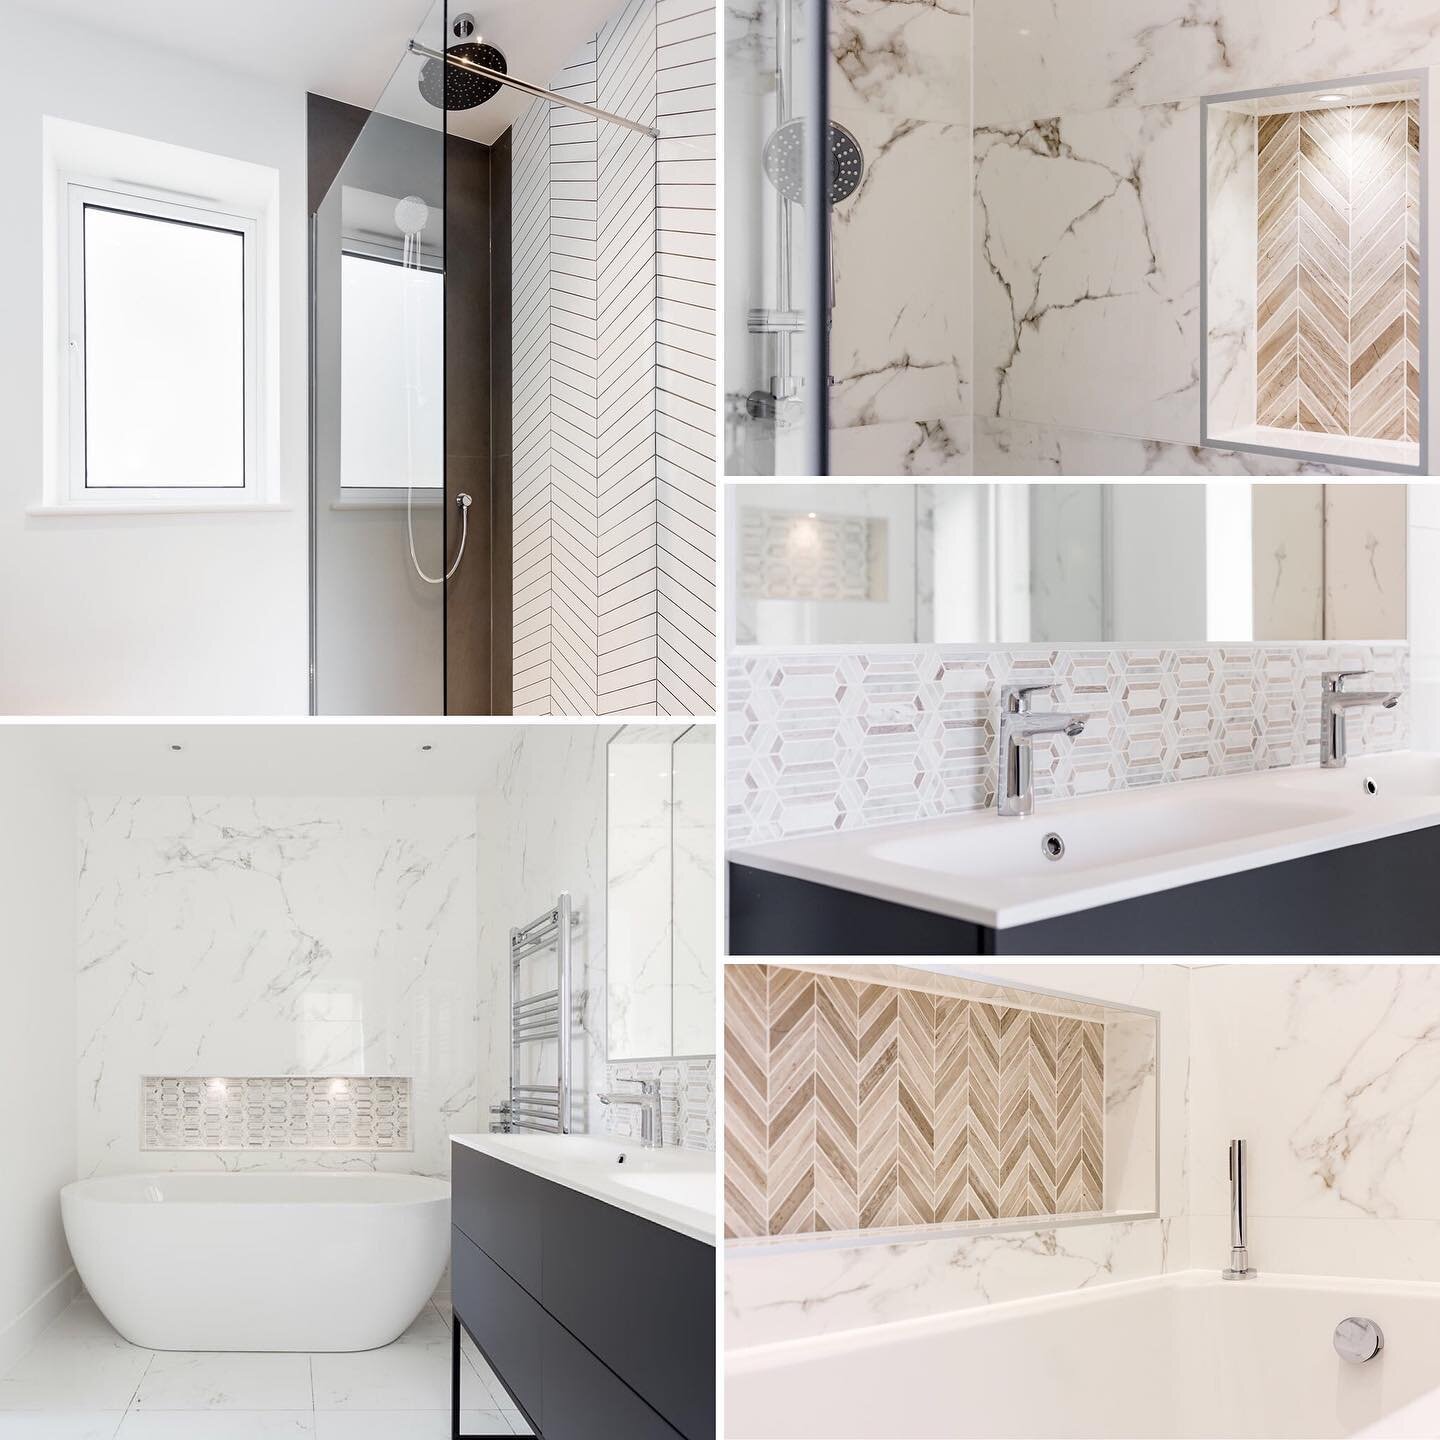 Proud of pristine finish achieved in all the bathrooms at 14a #durlstonheights. Cutting edge design, premium quality #porcelanosa and #firedearth tiles fitted throughout. One home remains on this #luxurydevelopment in #lowerparkstone. Contact @philip